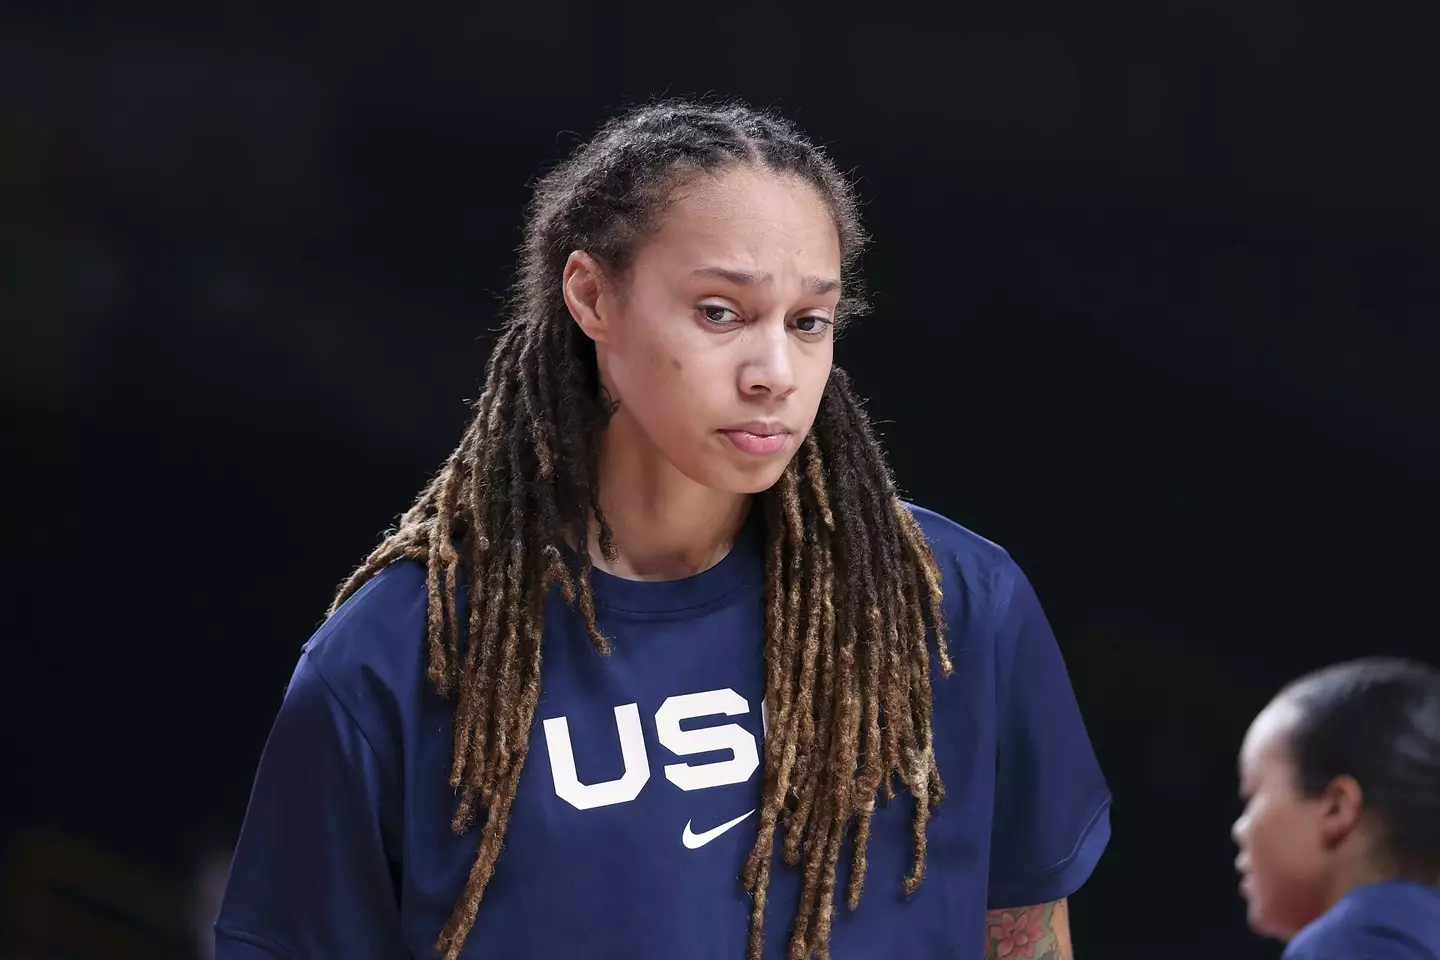 Brittney Griner faces spending the next nine years in a Russian prison.